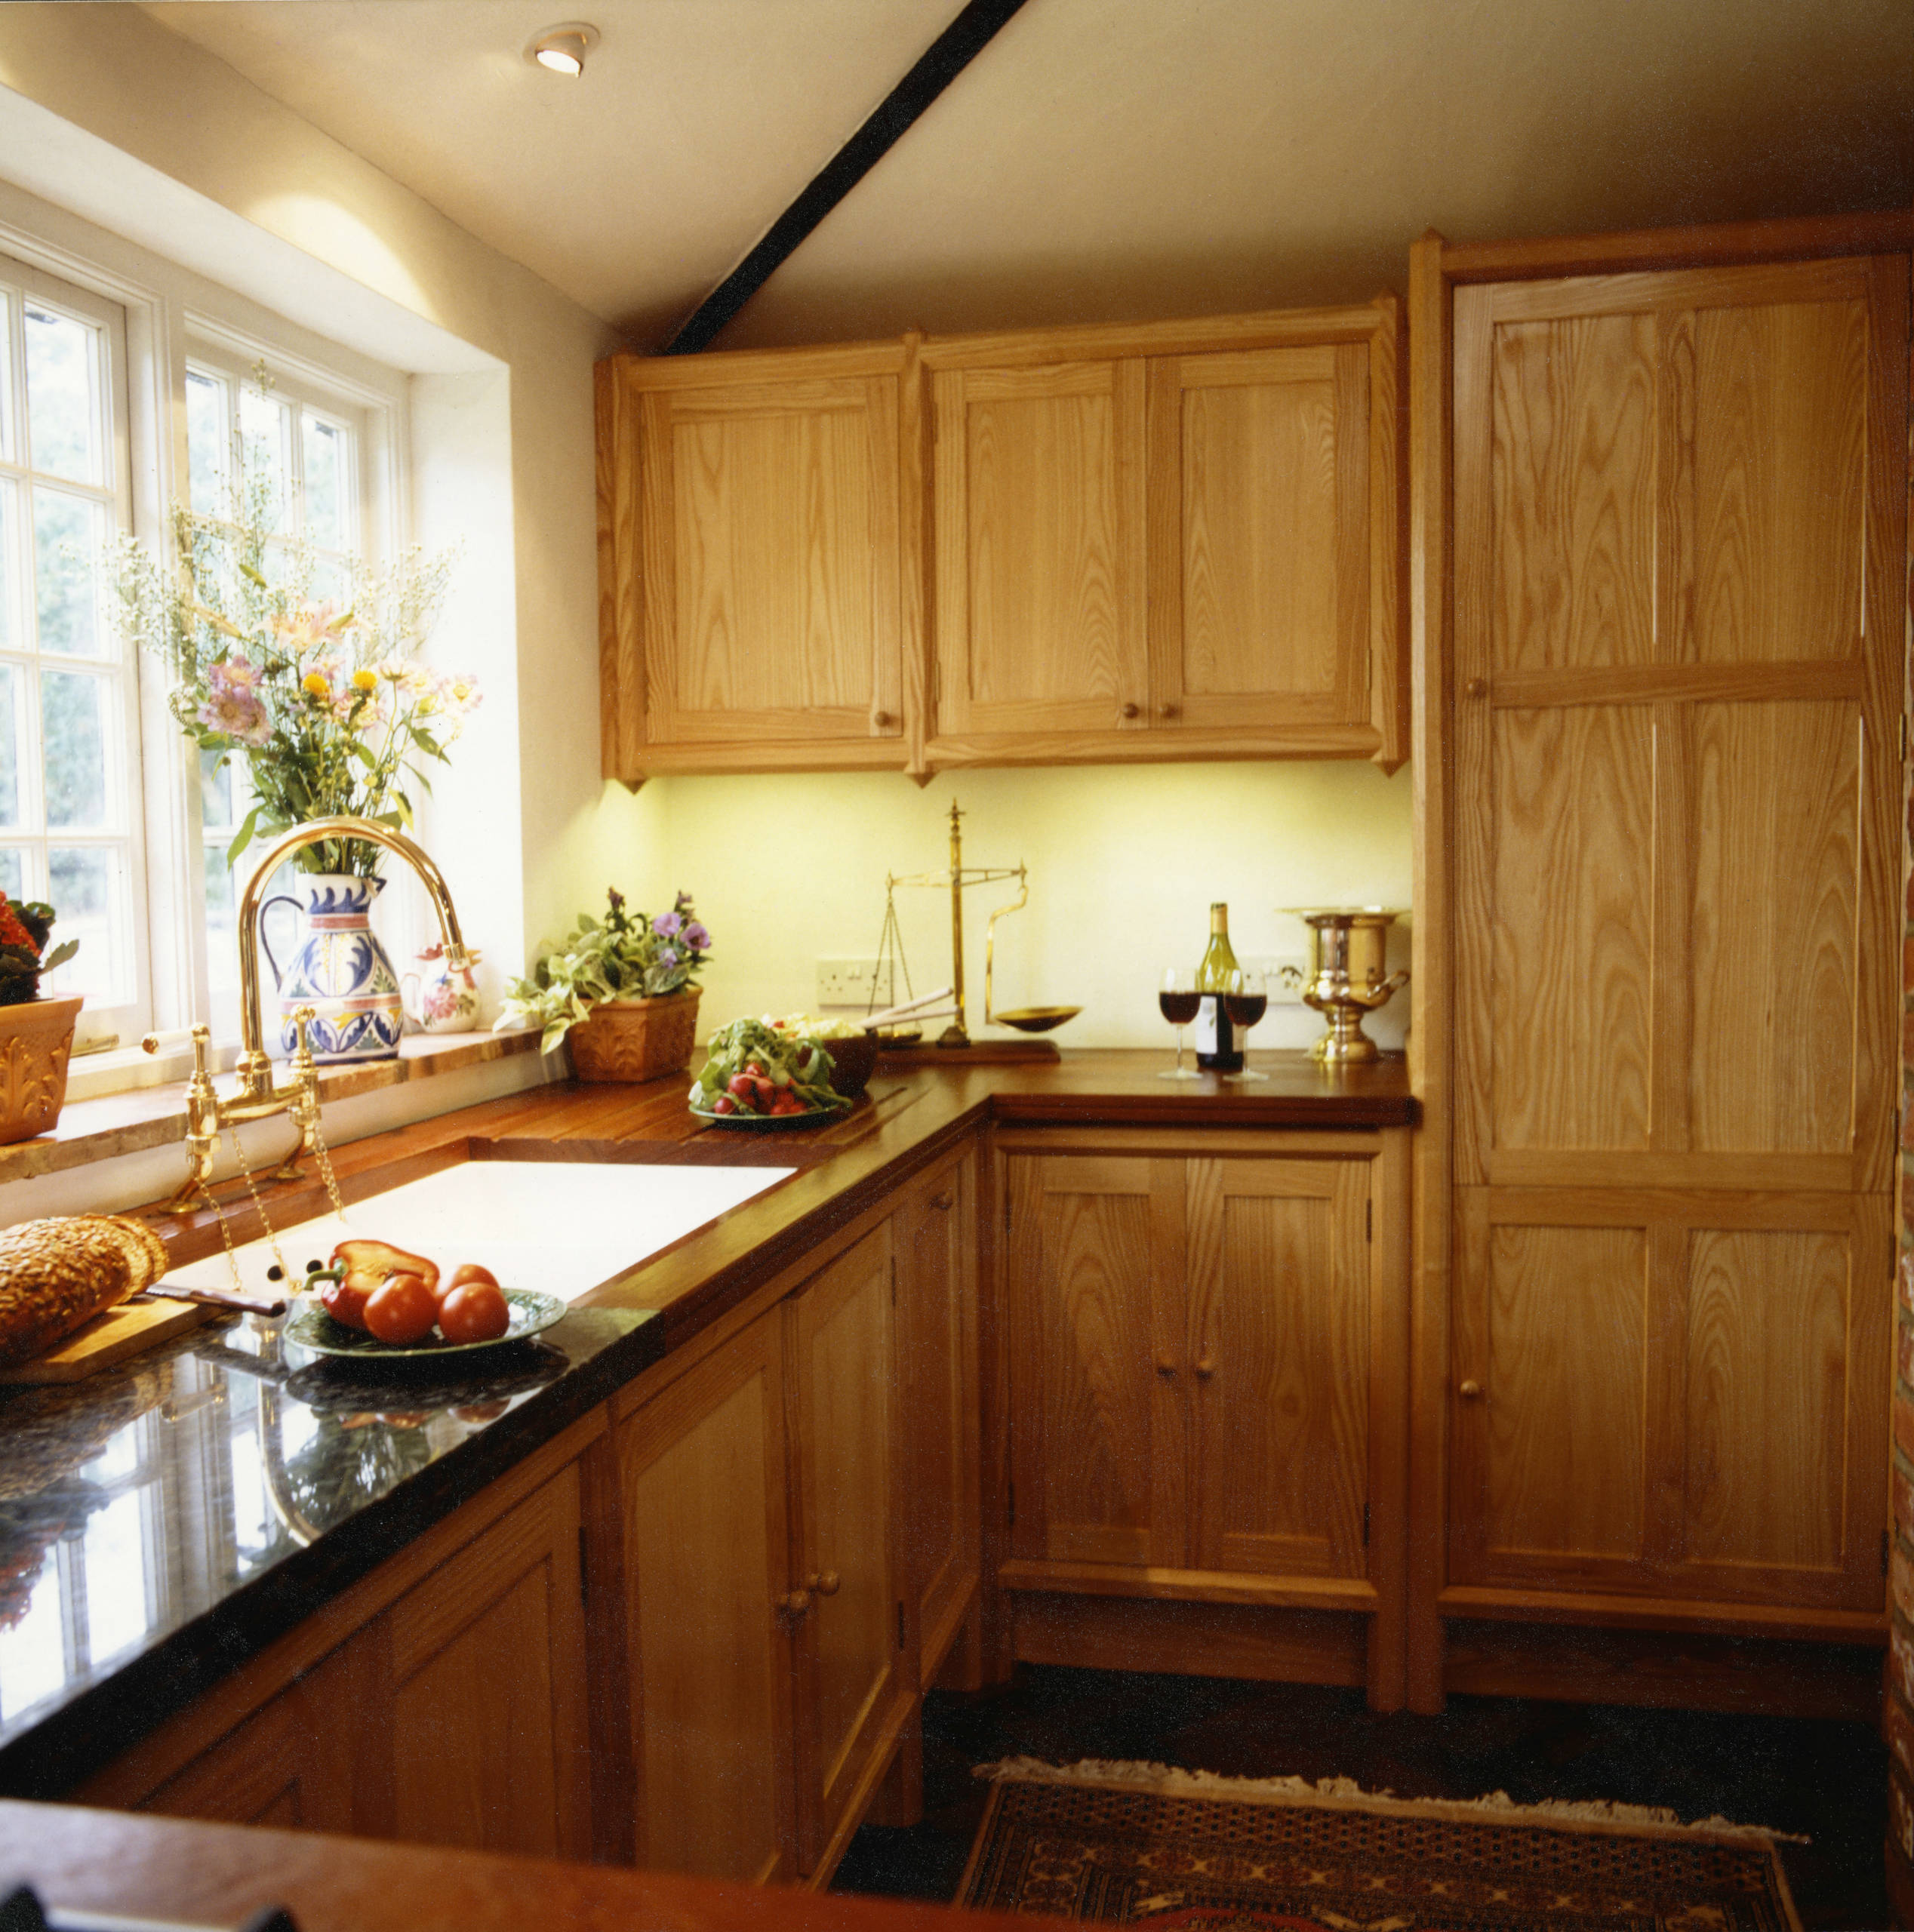 Maidenhead Ash Kitchen with an Ocagonal Framework designed and made by Tim Wood